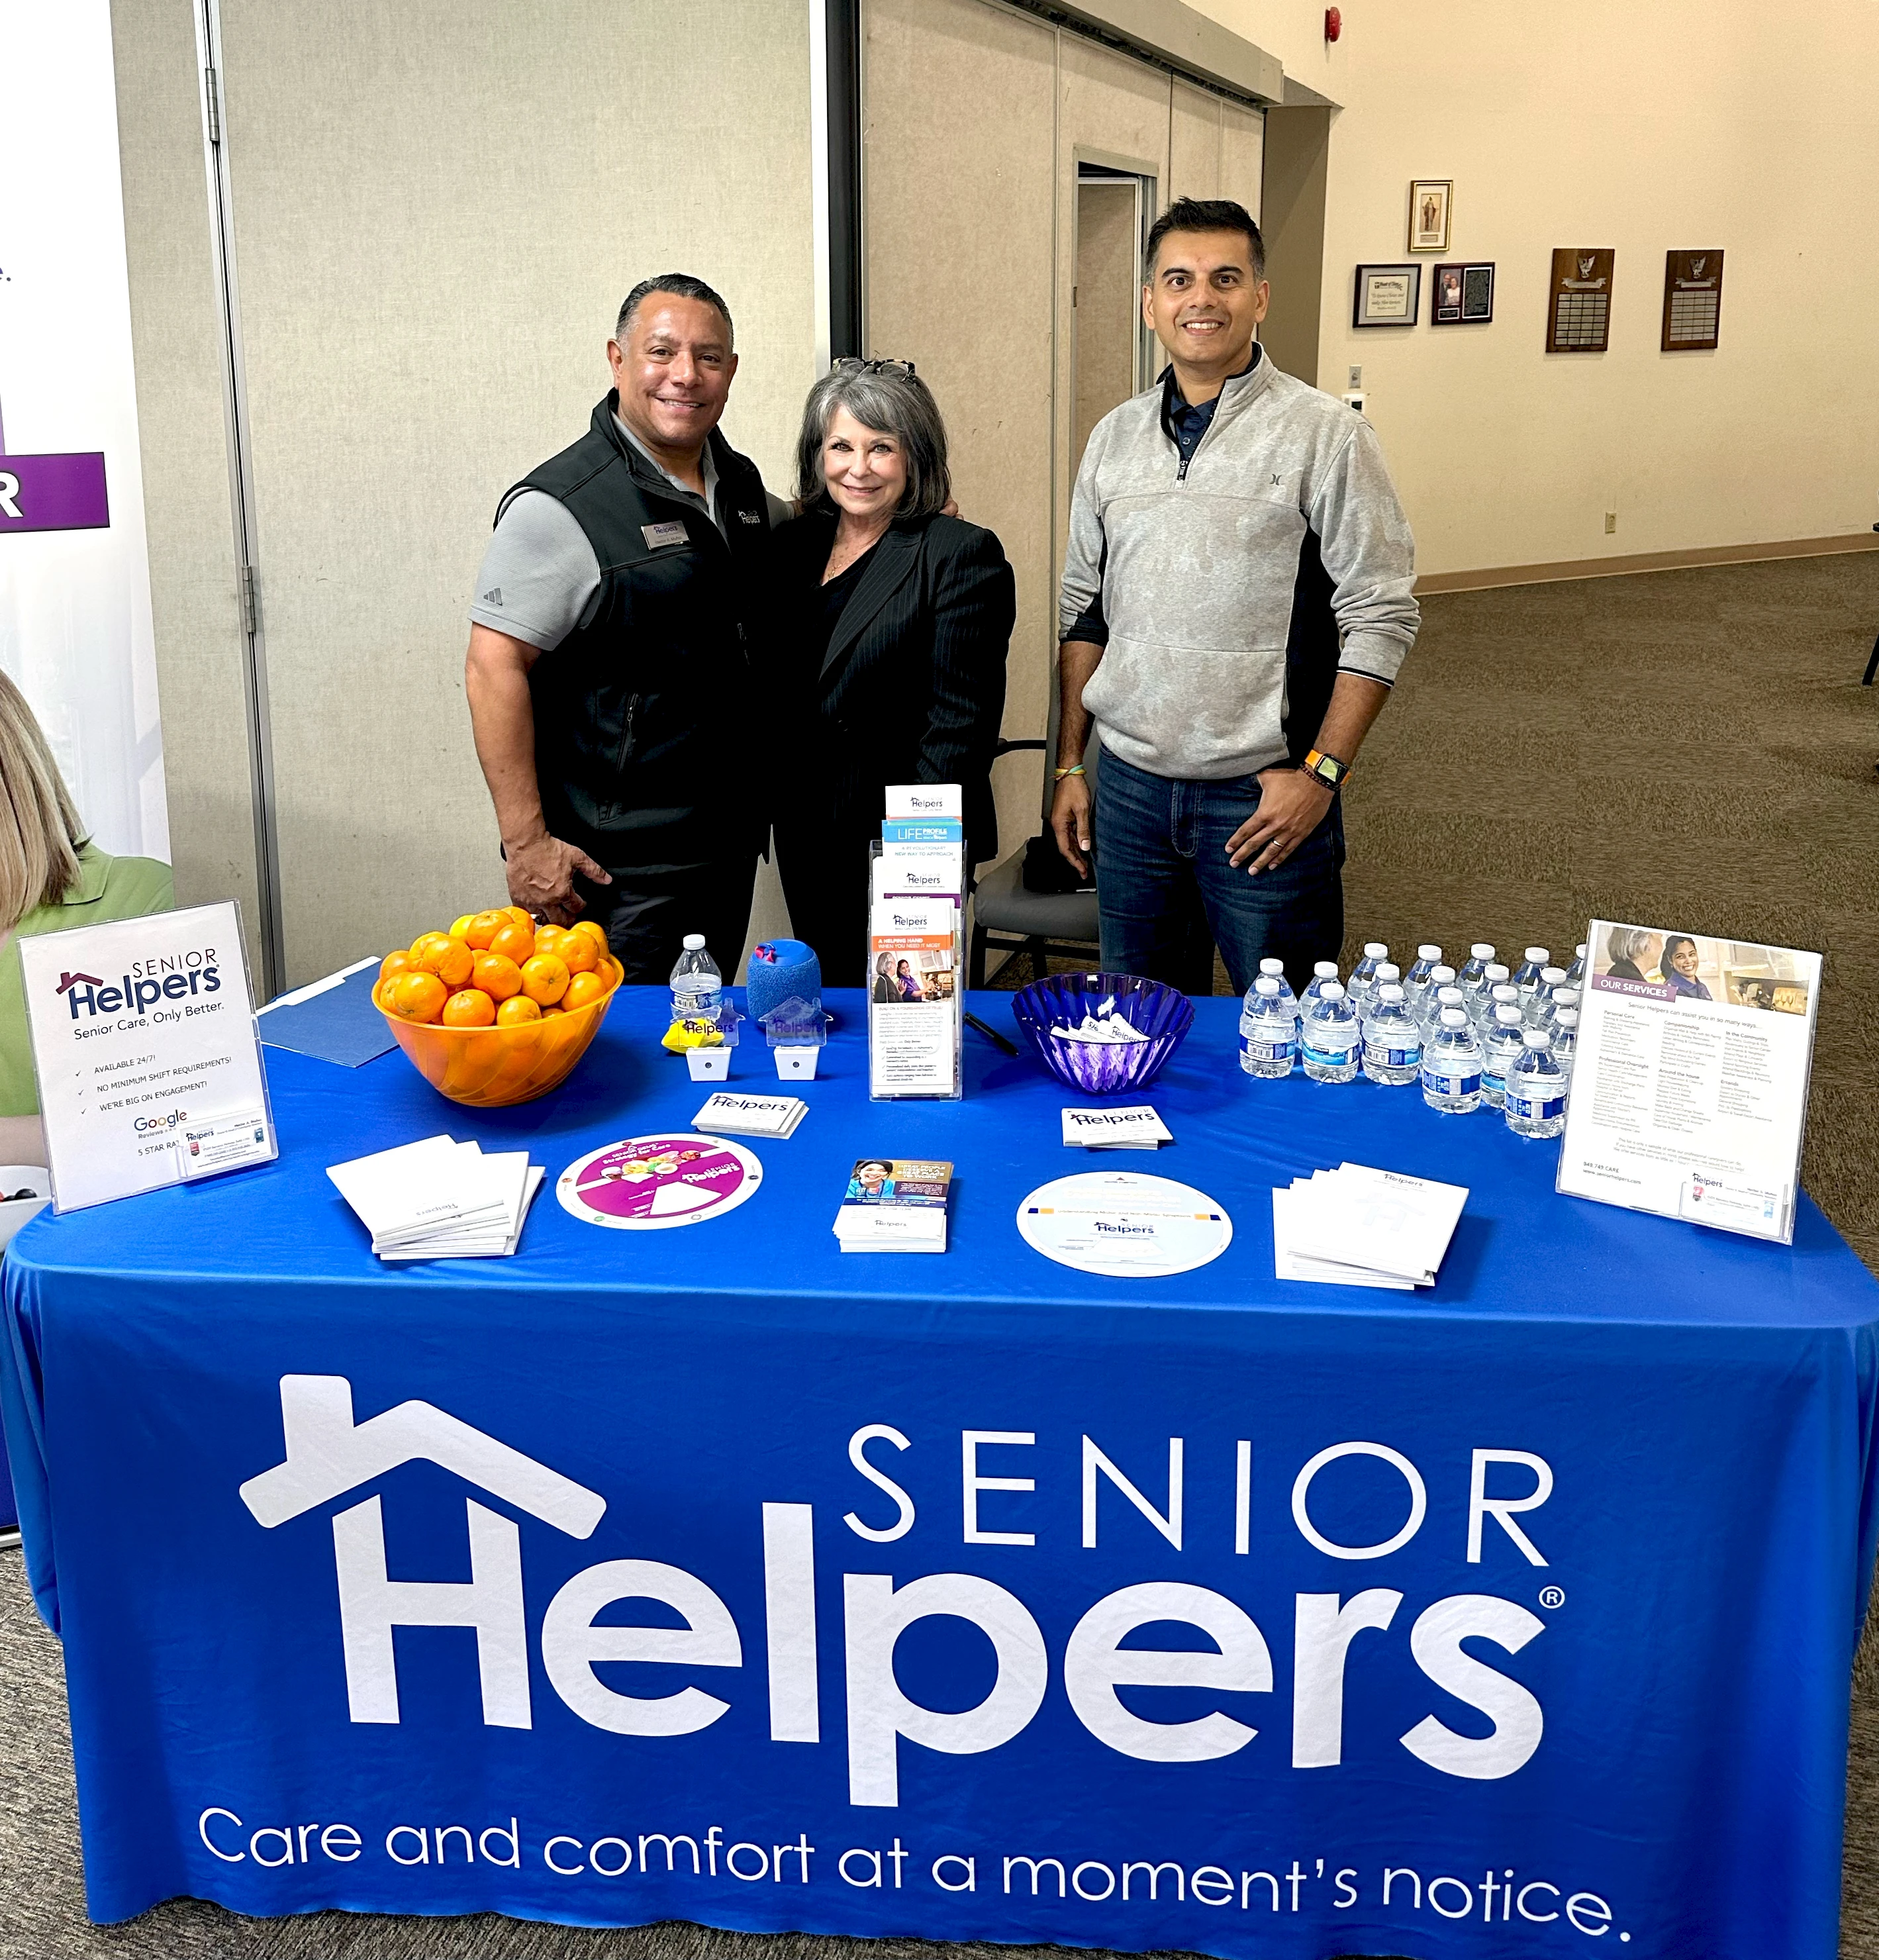 We had a great time over the weekend at Mount of Olives Adult Day in Mision Viejo. Great spending time with new Senior Helpers franchisee, Keyur Shah and the always insightful Patty Barnett from Alzheimer's OC.